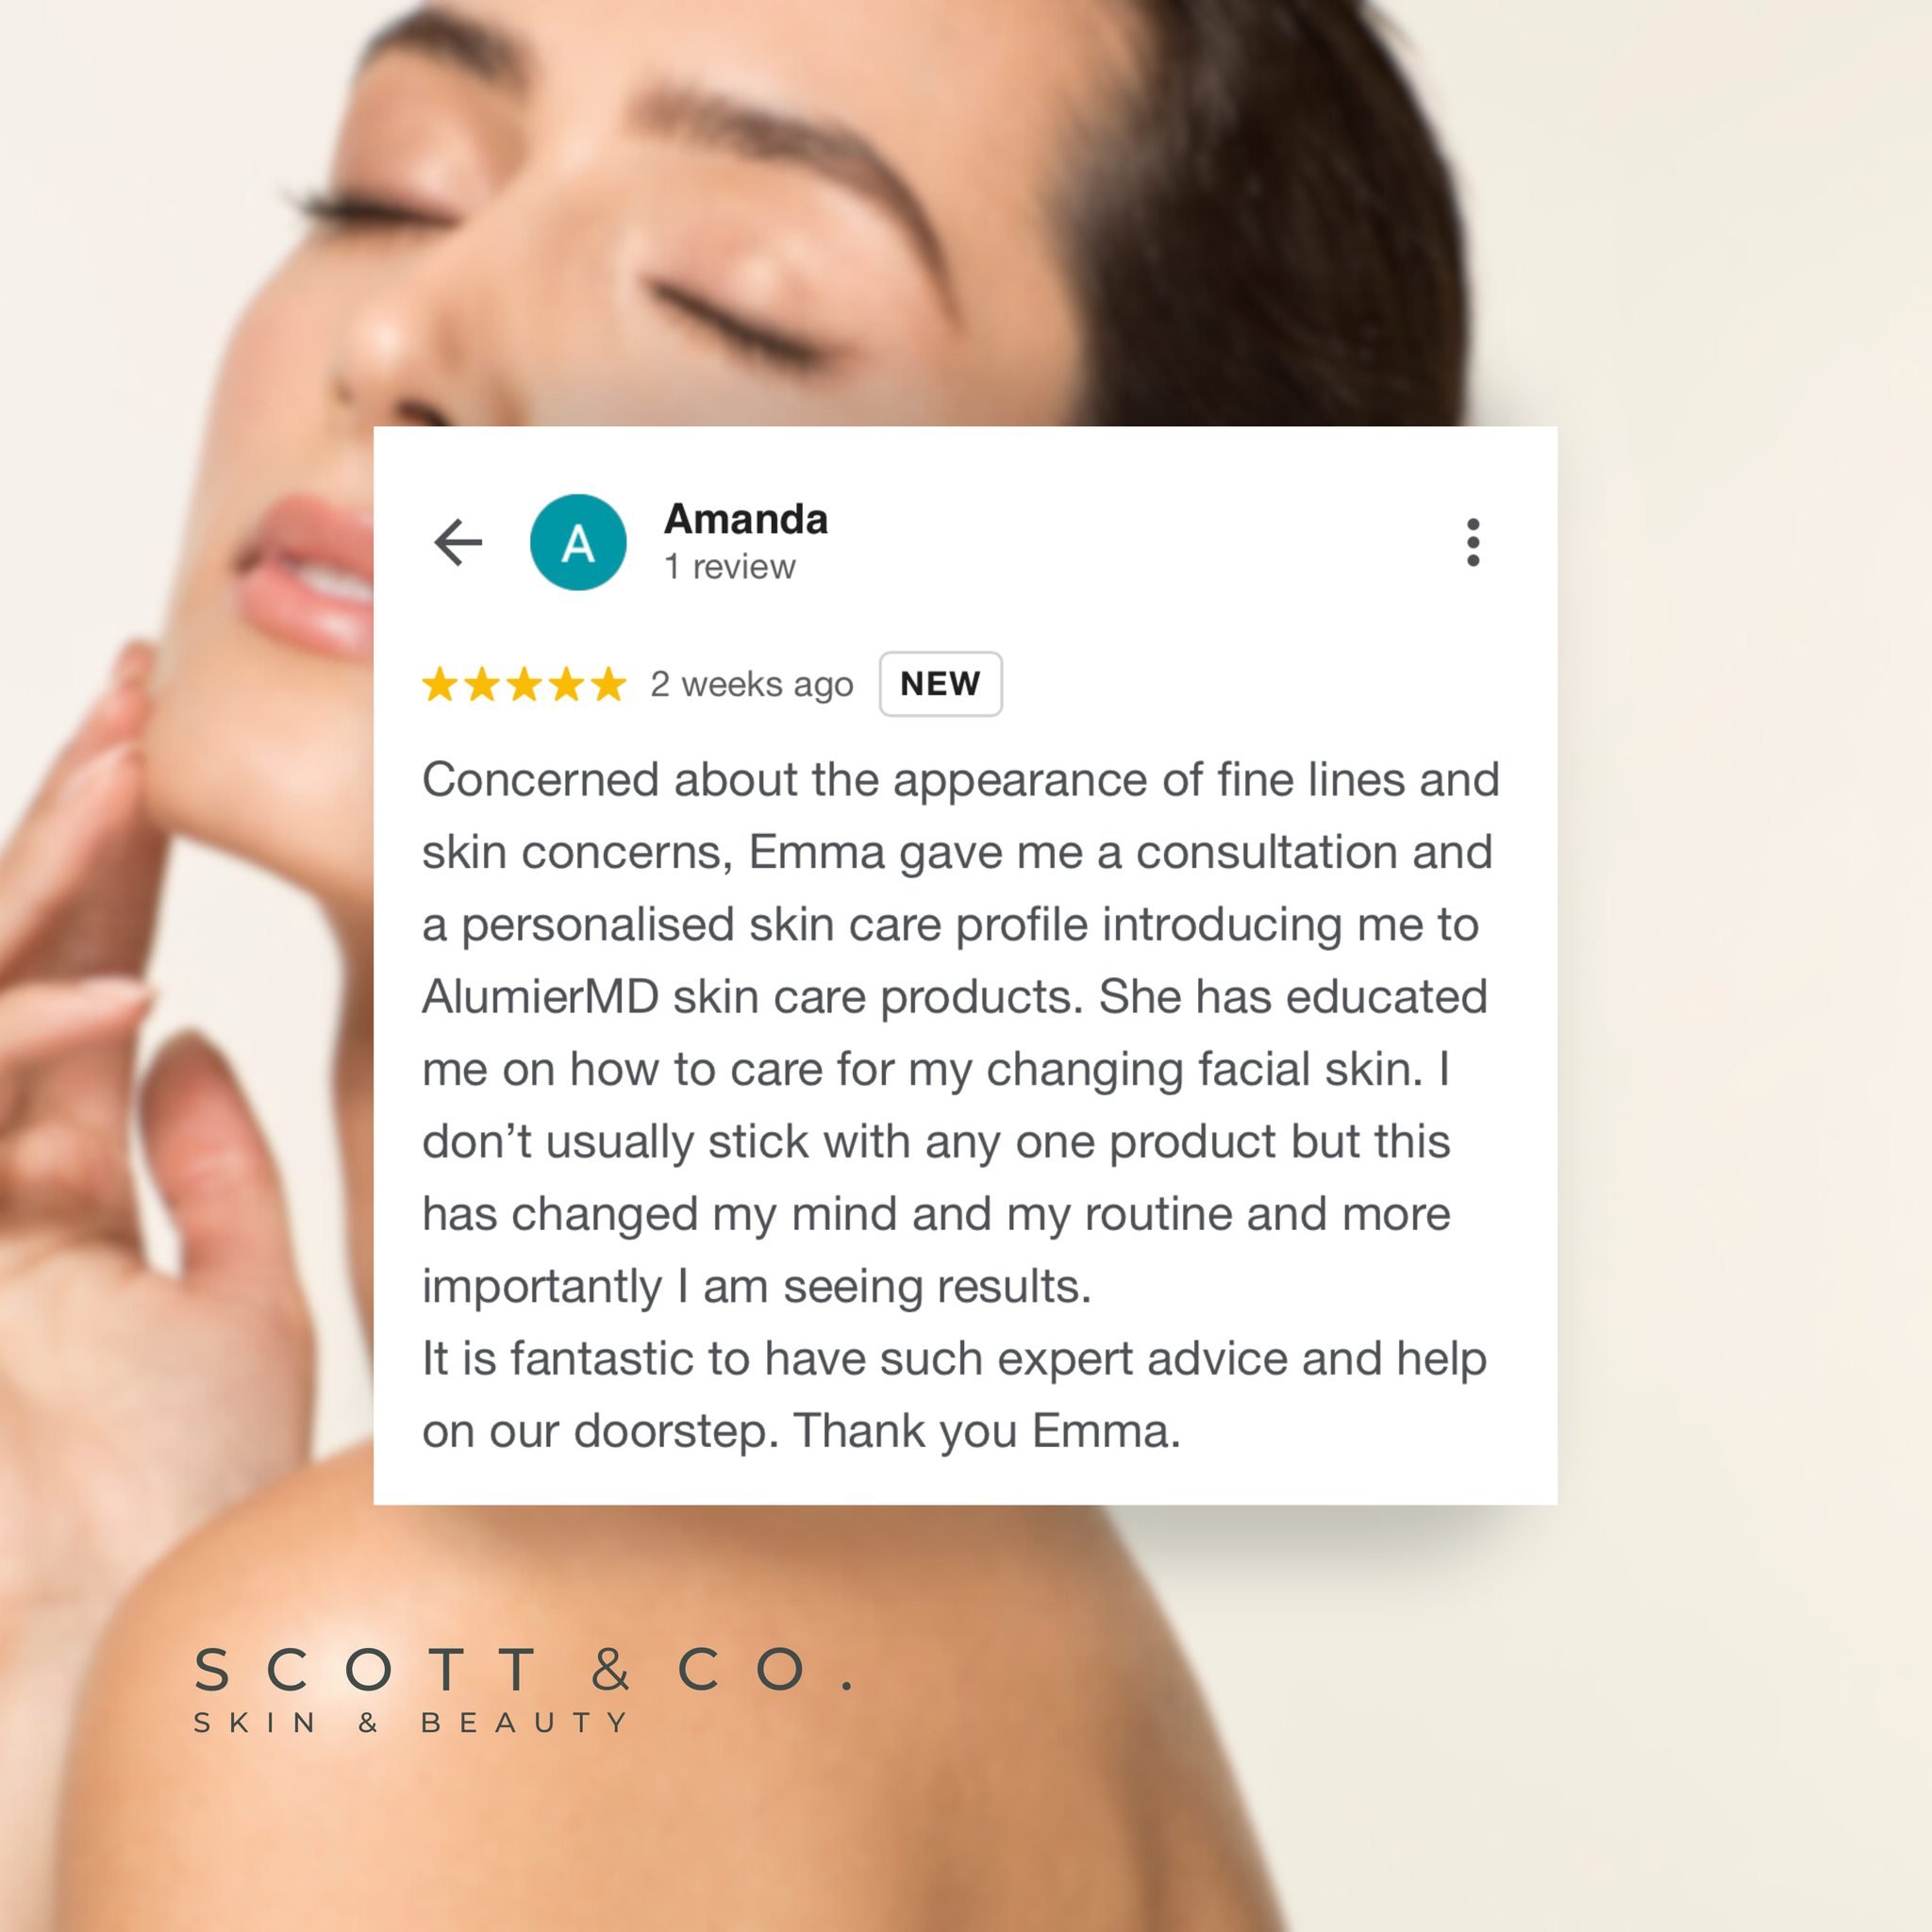 &lsquo;It is fantastic to have such expert advice and help on our doorstep&rsquo; 💫

Knowing that our advice has led to better skin for our clients makes us so happy, and it's moments like these that remind us why we do what we do! ☺️

-

#alumiermd